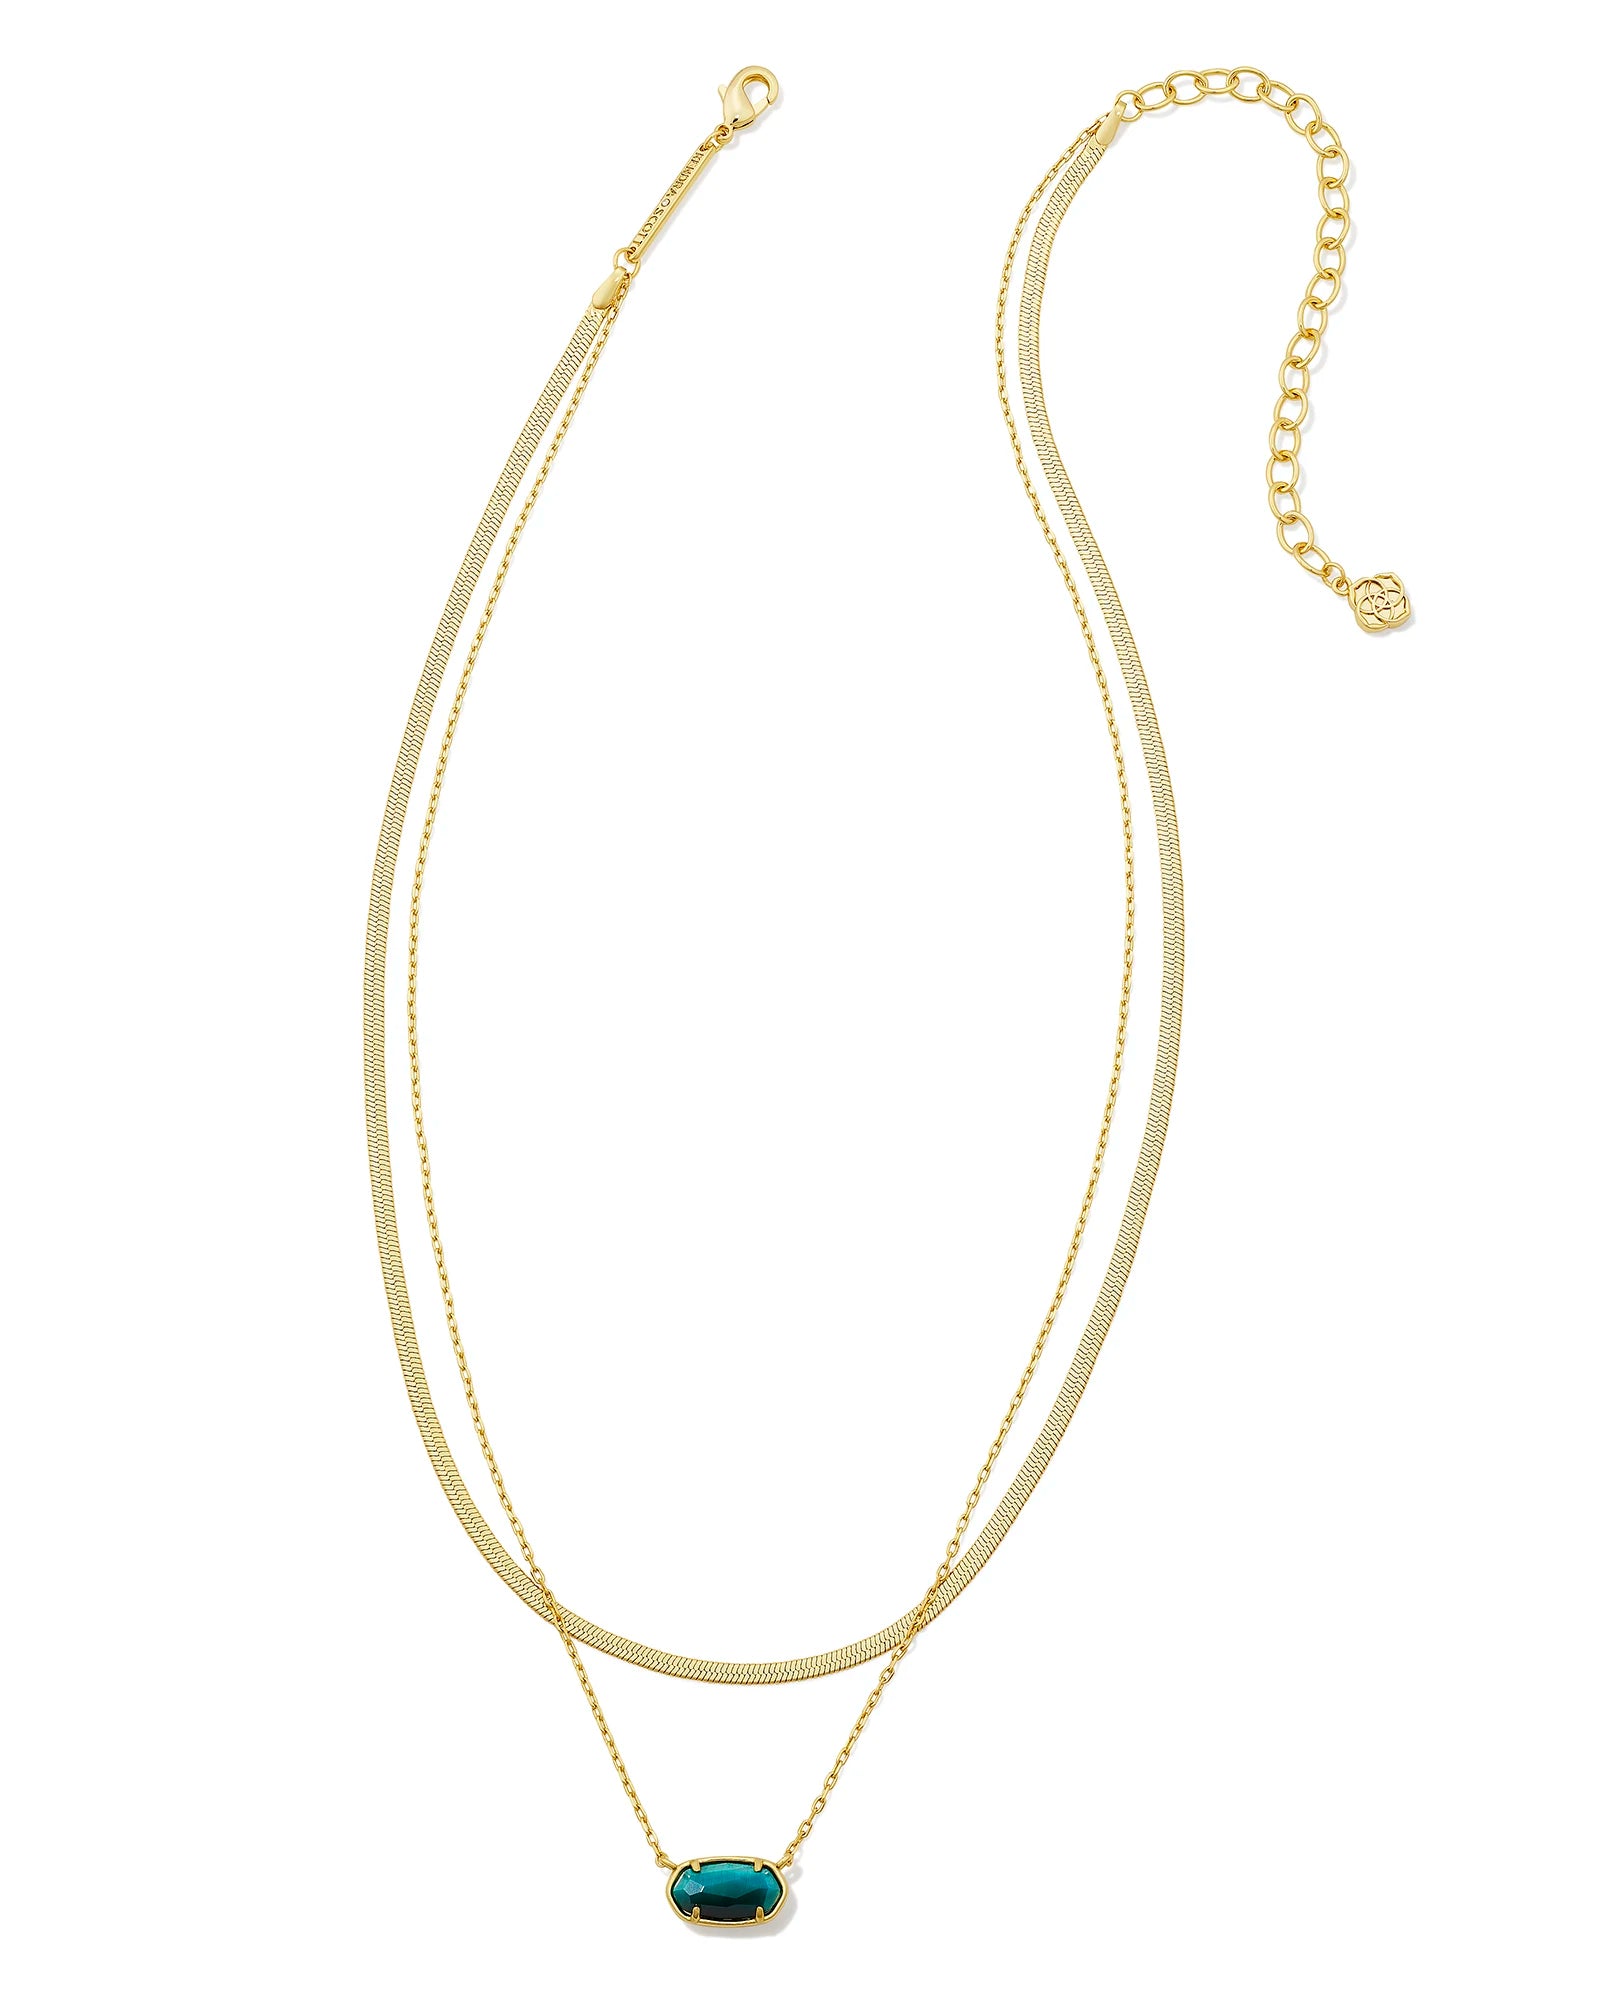 Kendra Scott | Grayson Herringbone Gold Multi Strand Necklace in Teal Tiger's Eye - Giddy Up Glamour Boutique